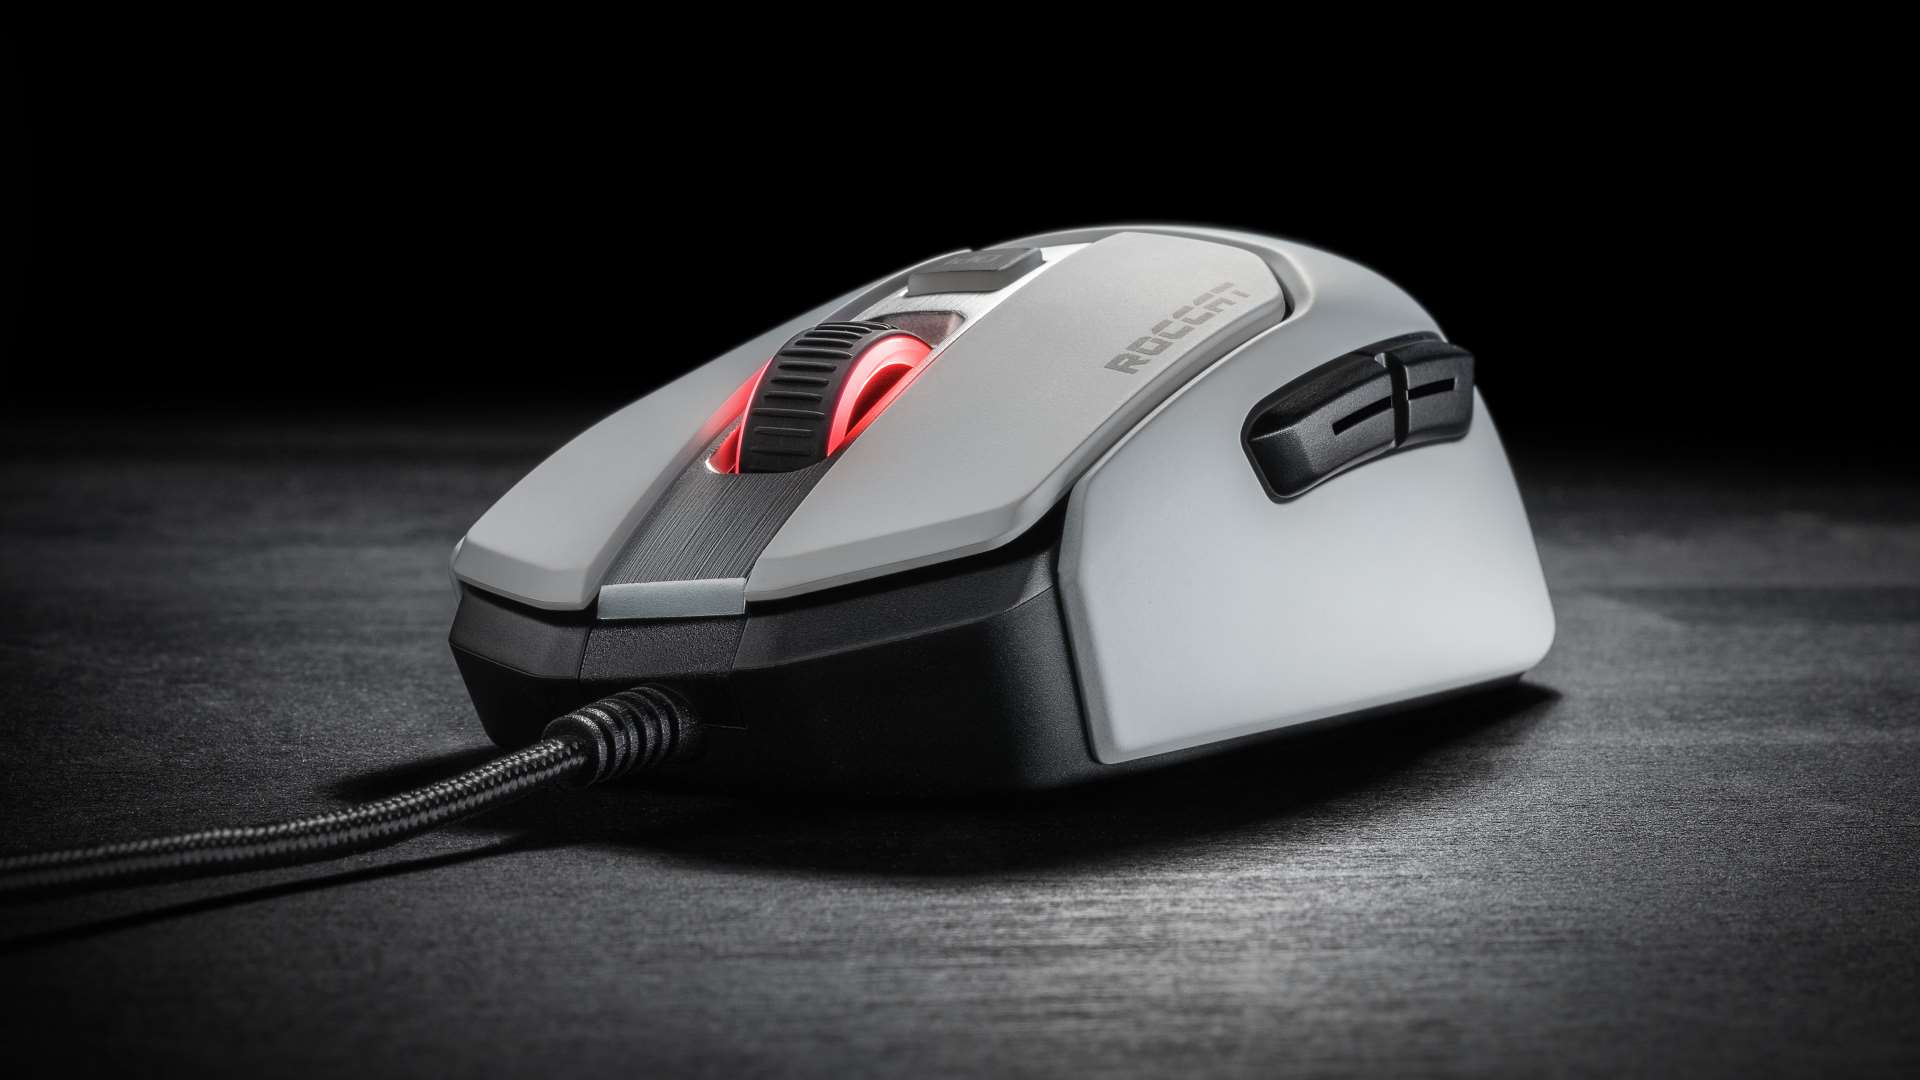 Roccat Kain 1 Aimo Gaming Mouse Review Lightweight Accurate And Super Responsive Pcgamesn